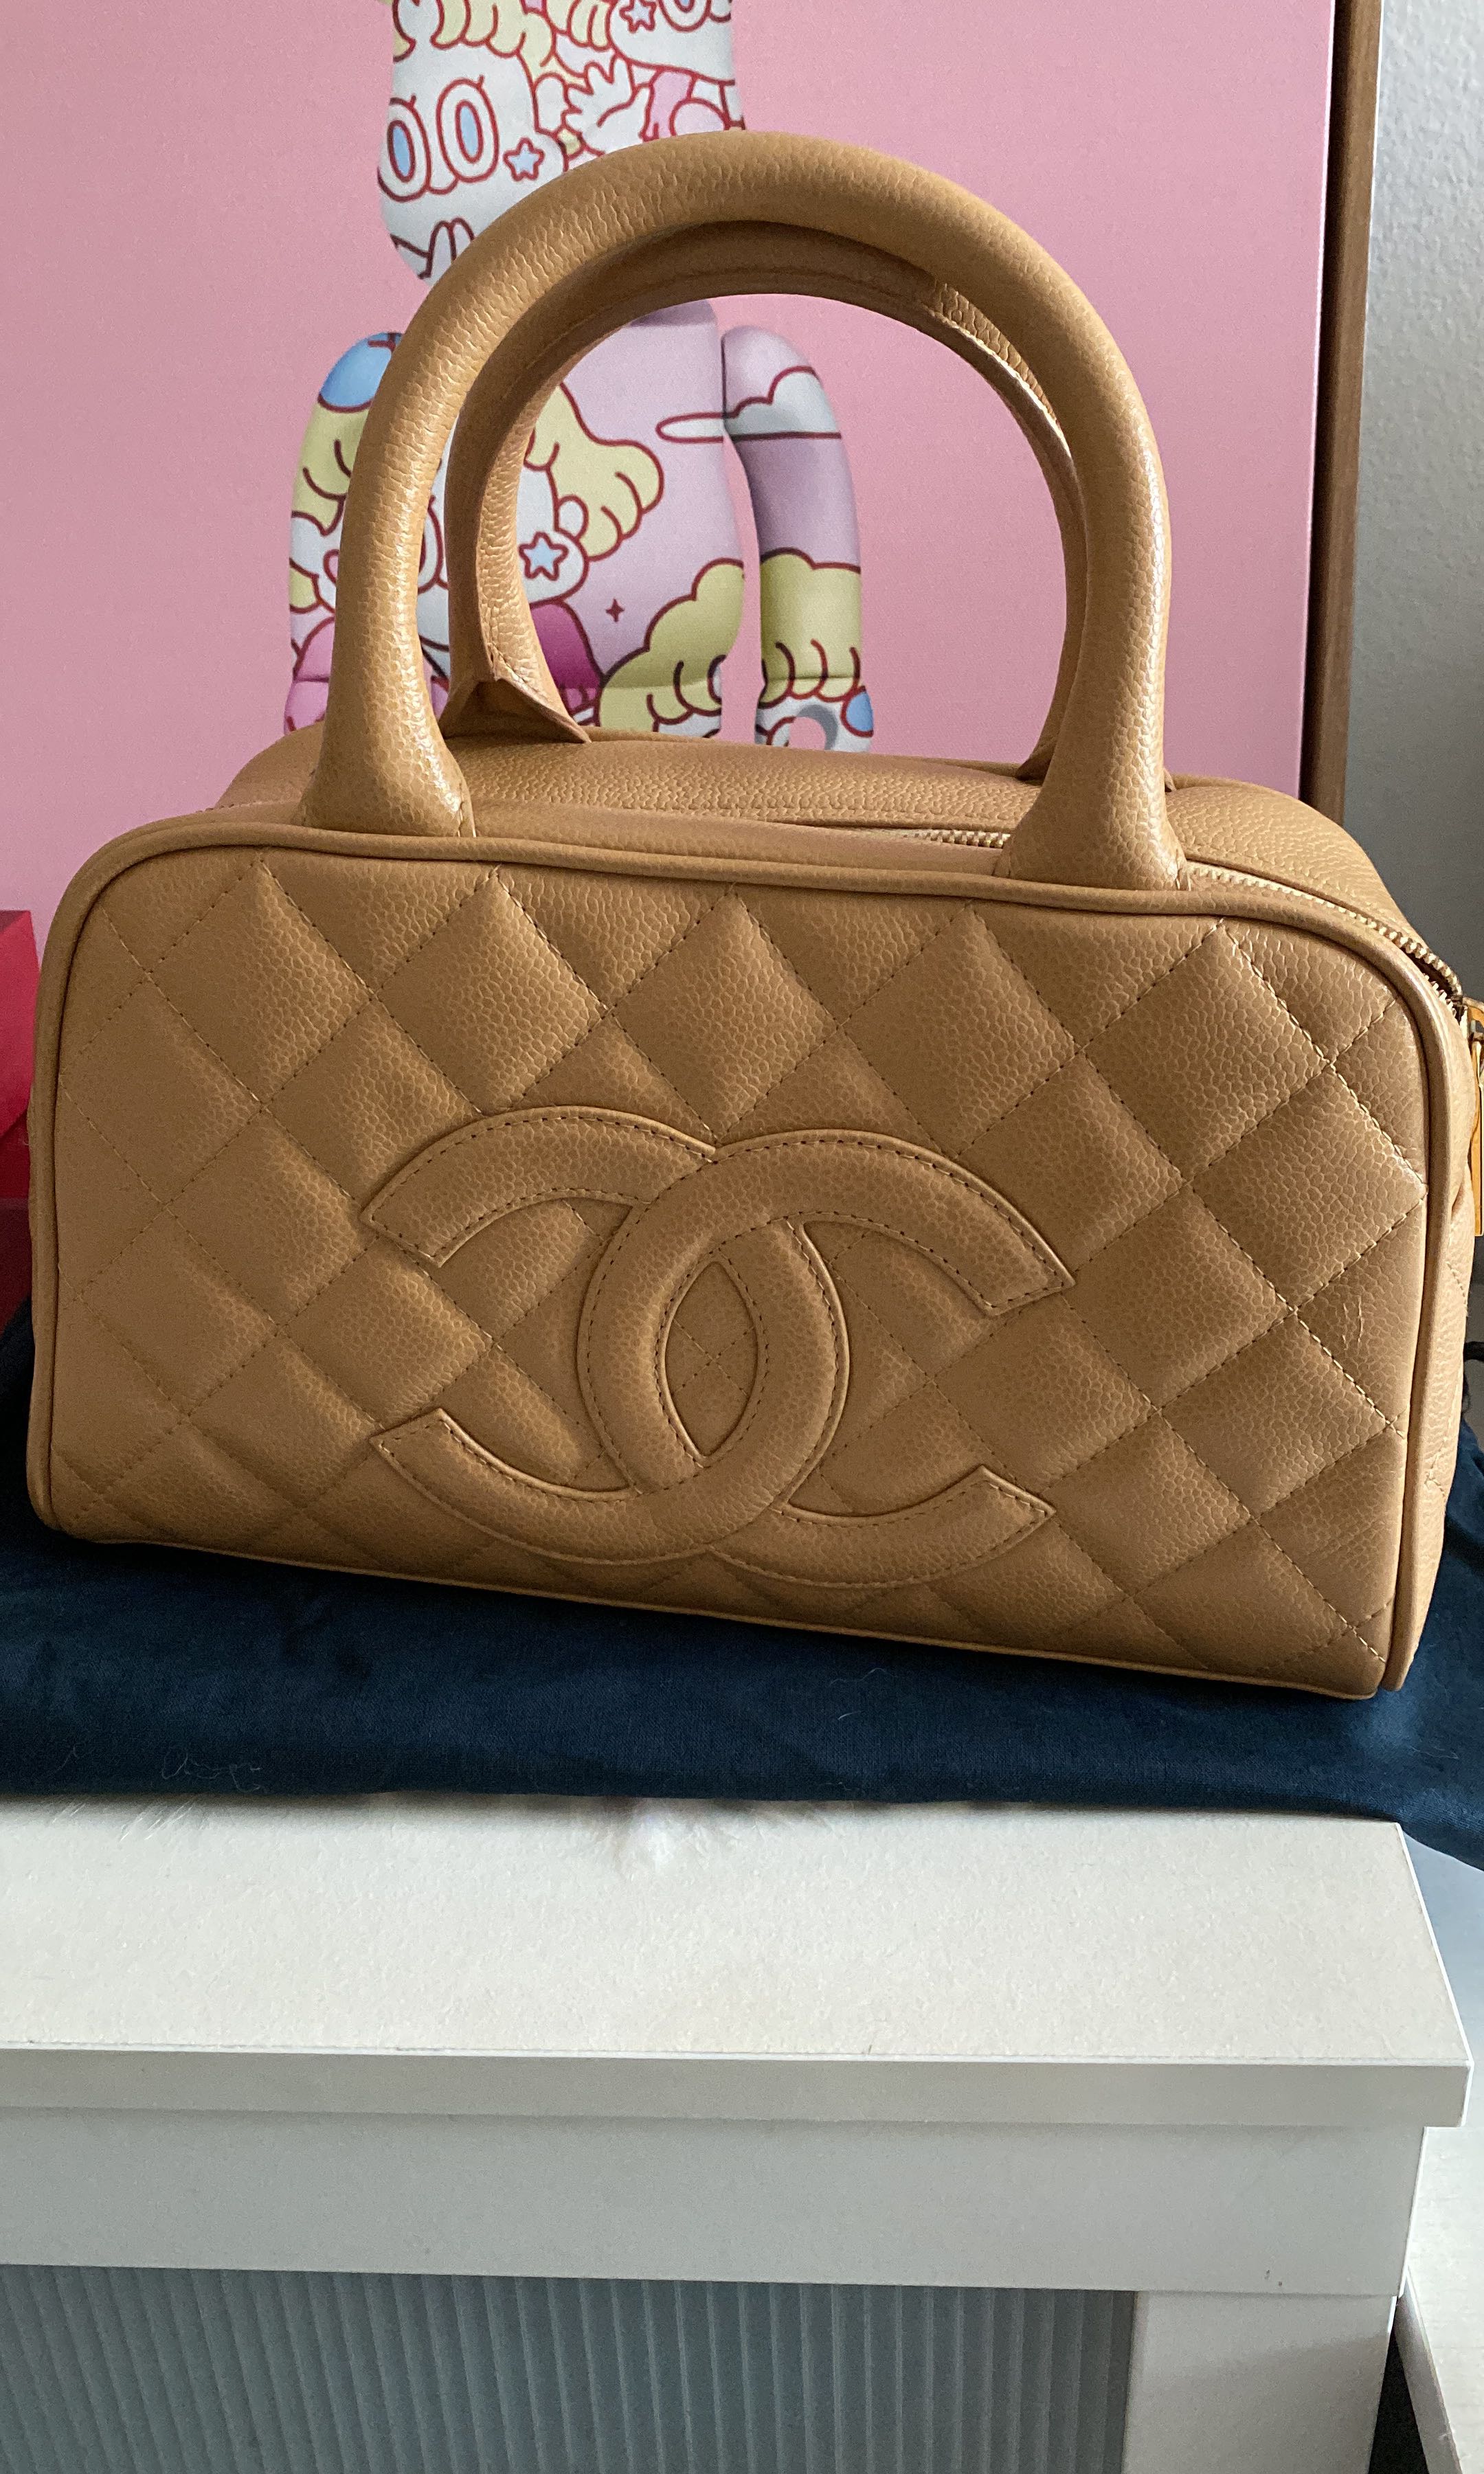 My Oldest Bag – The Chanel Bowler